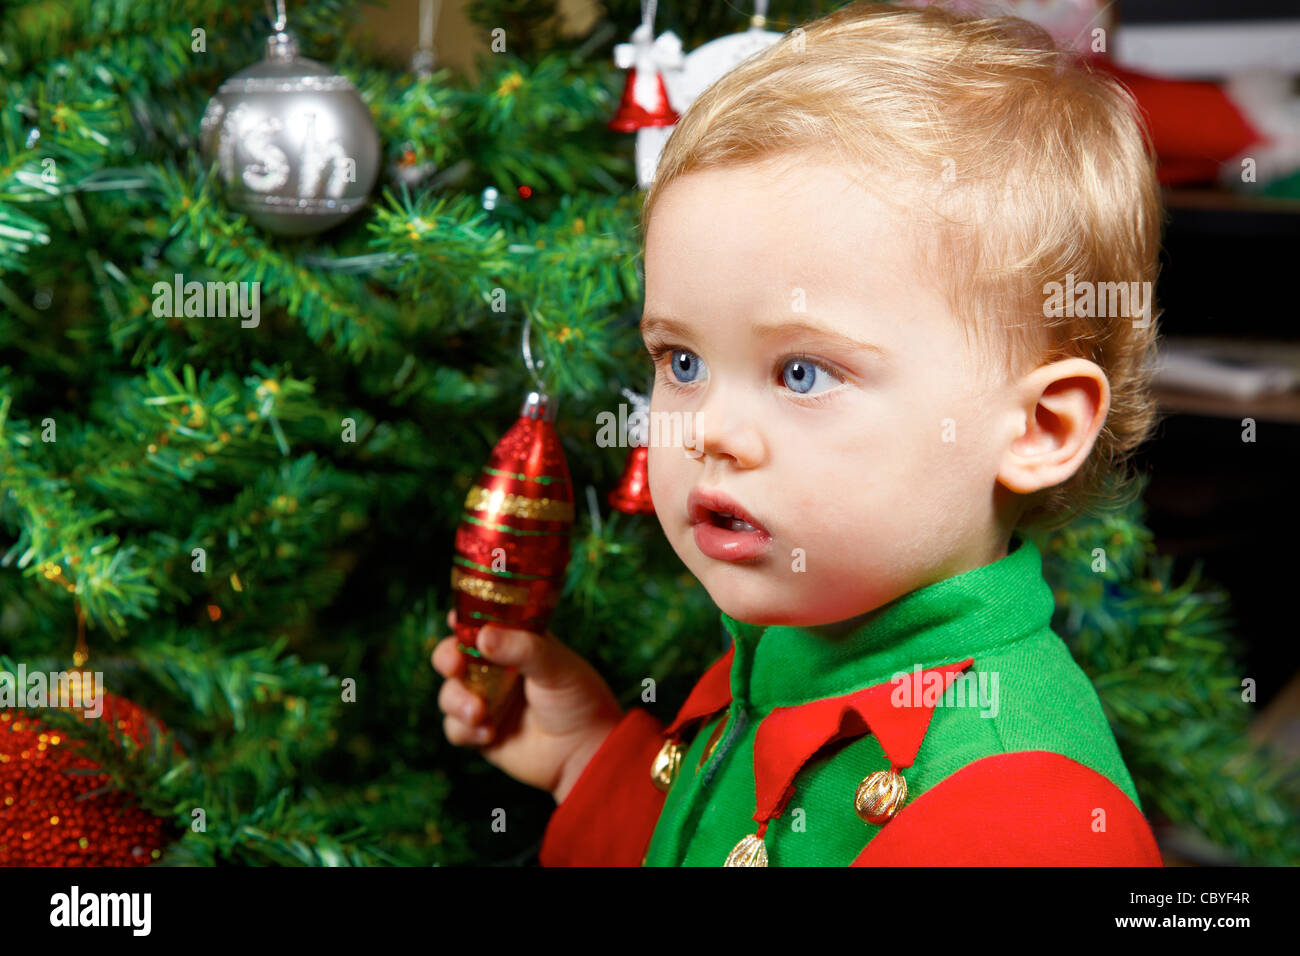 1 year old baby boy portrait by the Christmas tree. Stock Photo